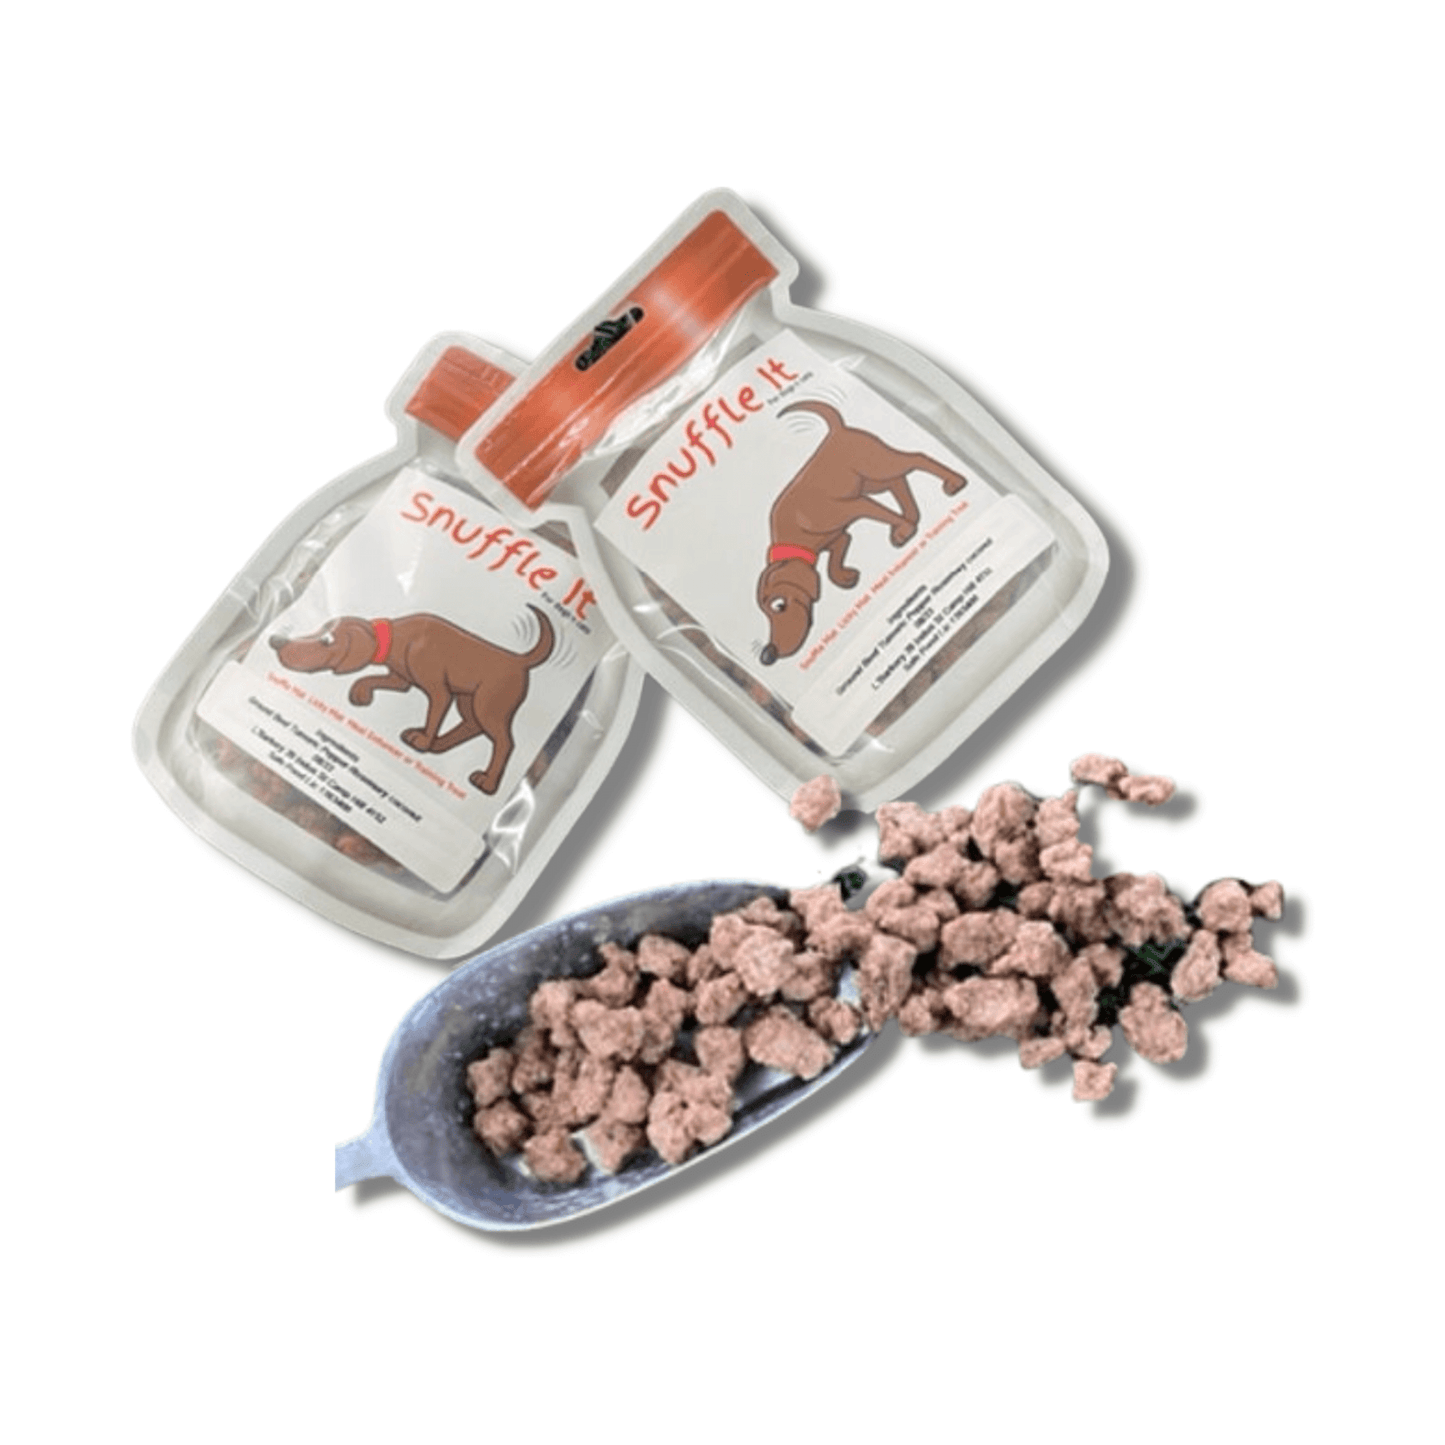 Beef mix snuffle mat mix, let's pawty 